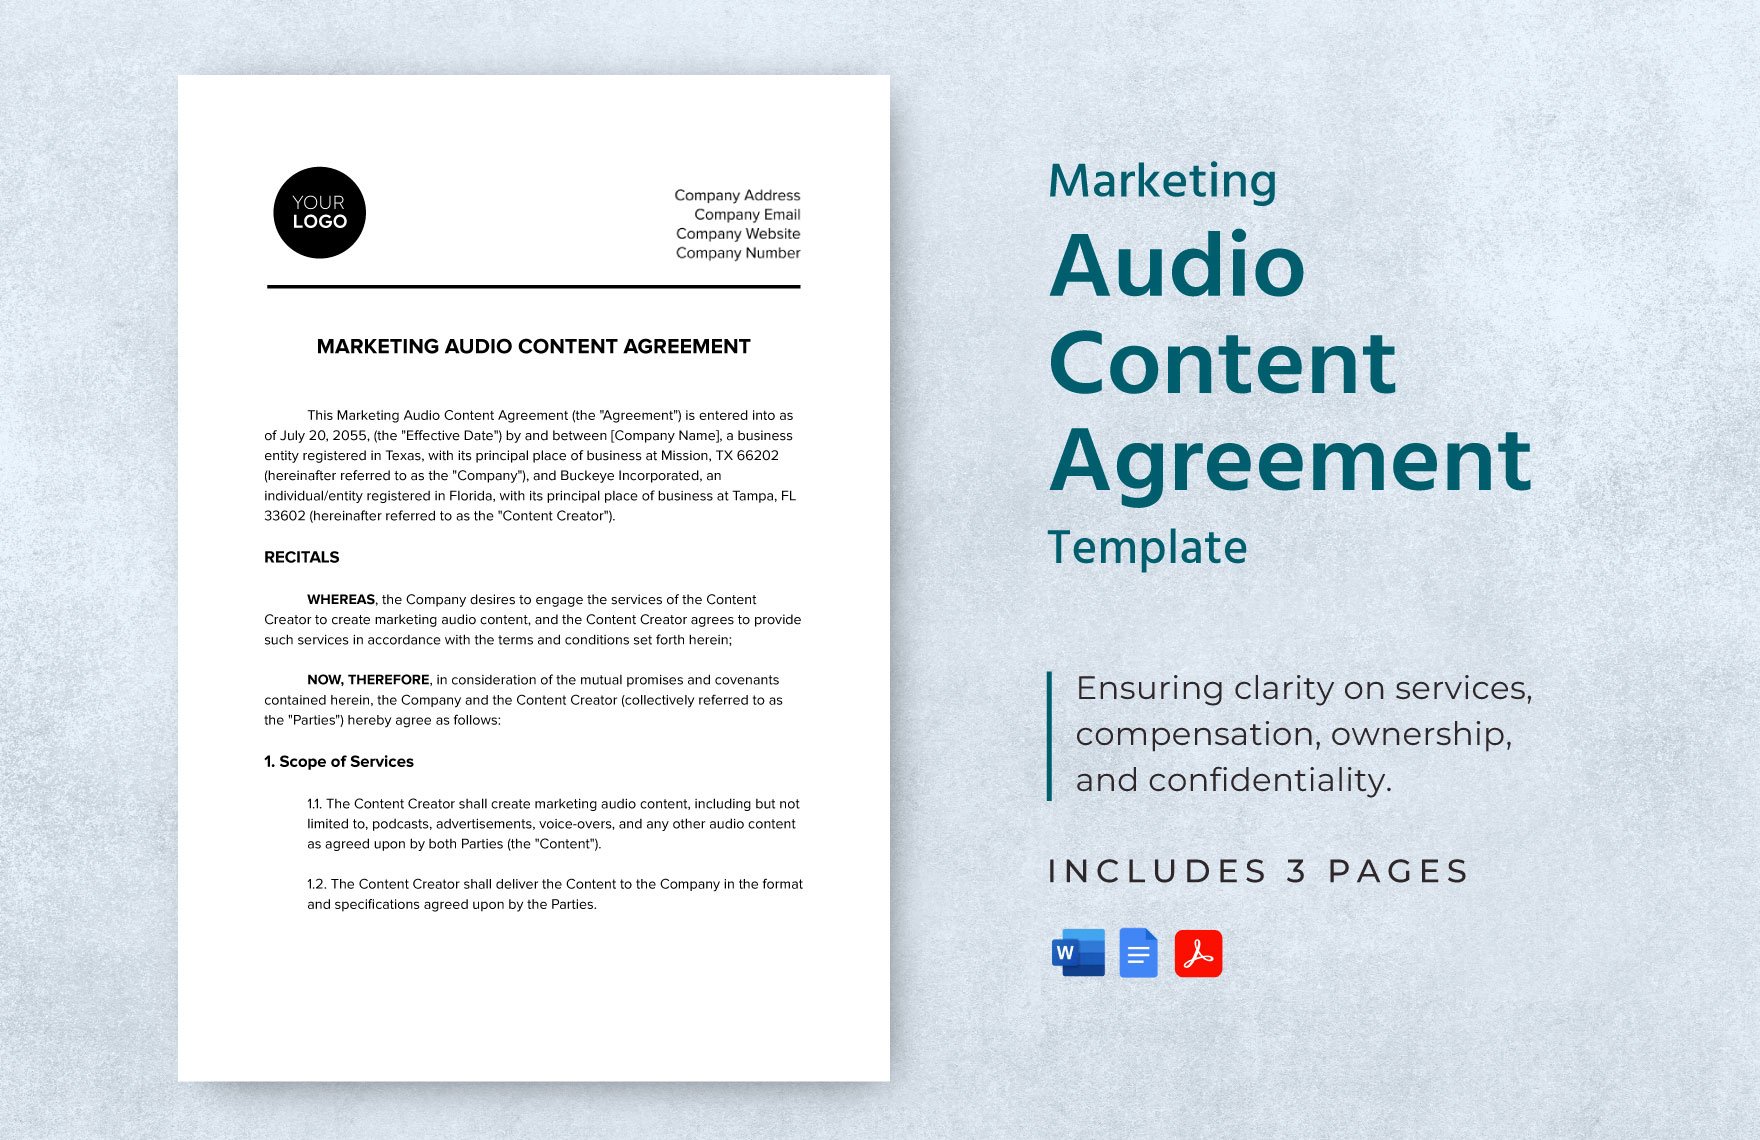 Marketing Audio Content Agreement Template in Word, Google Docs, PDF